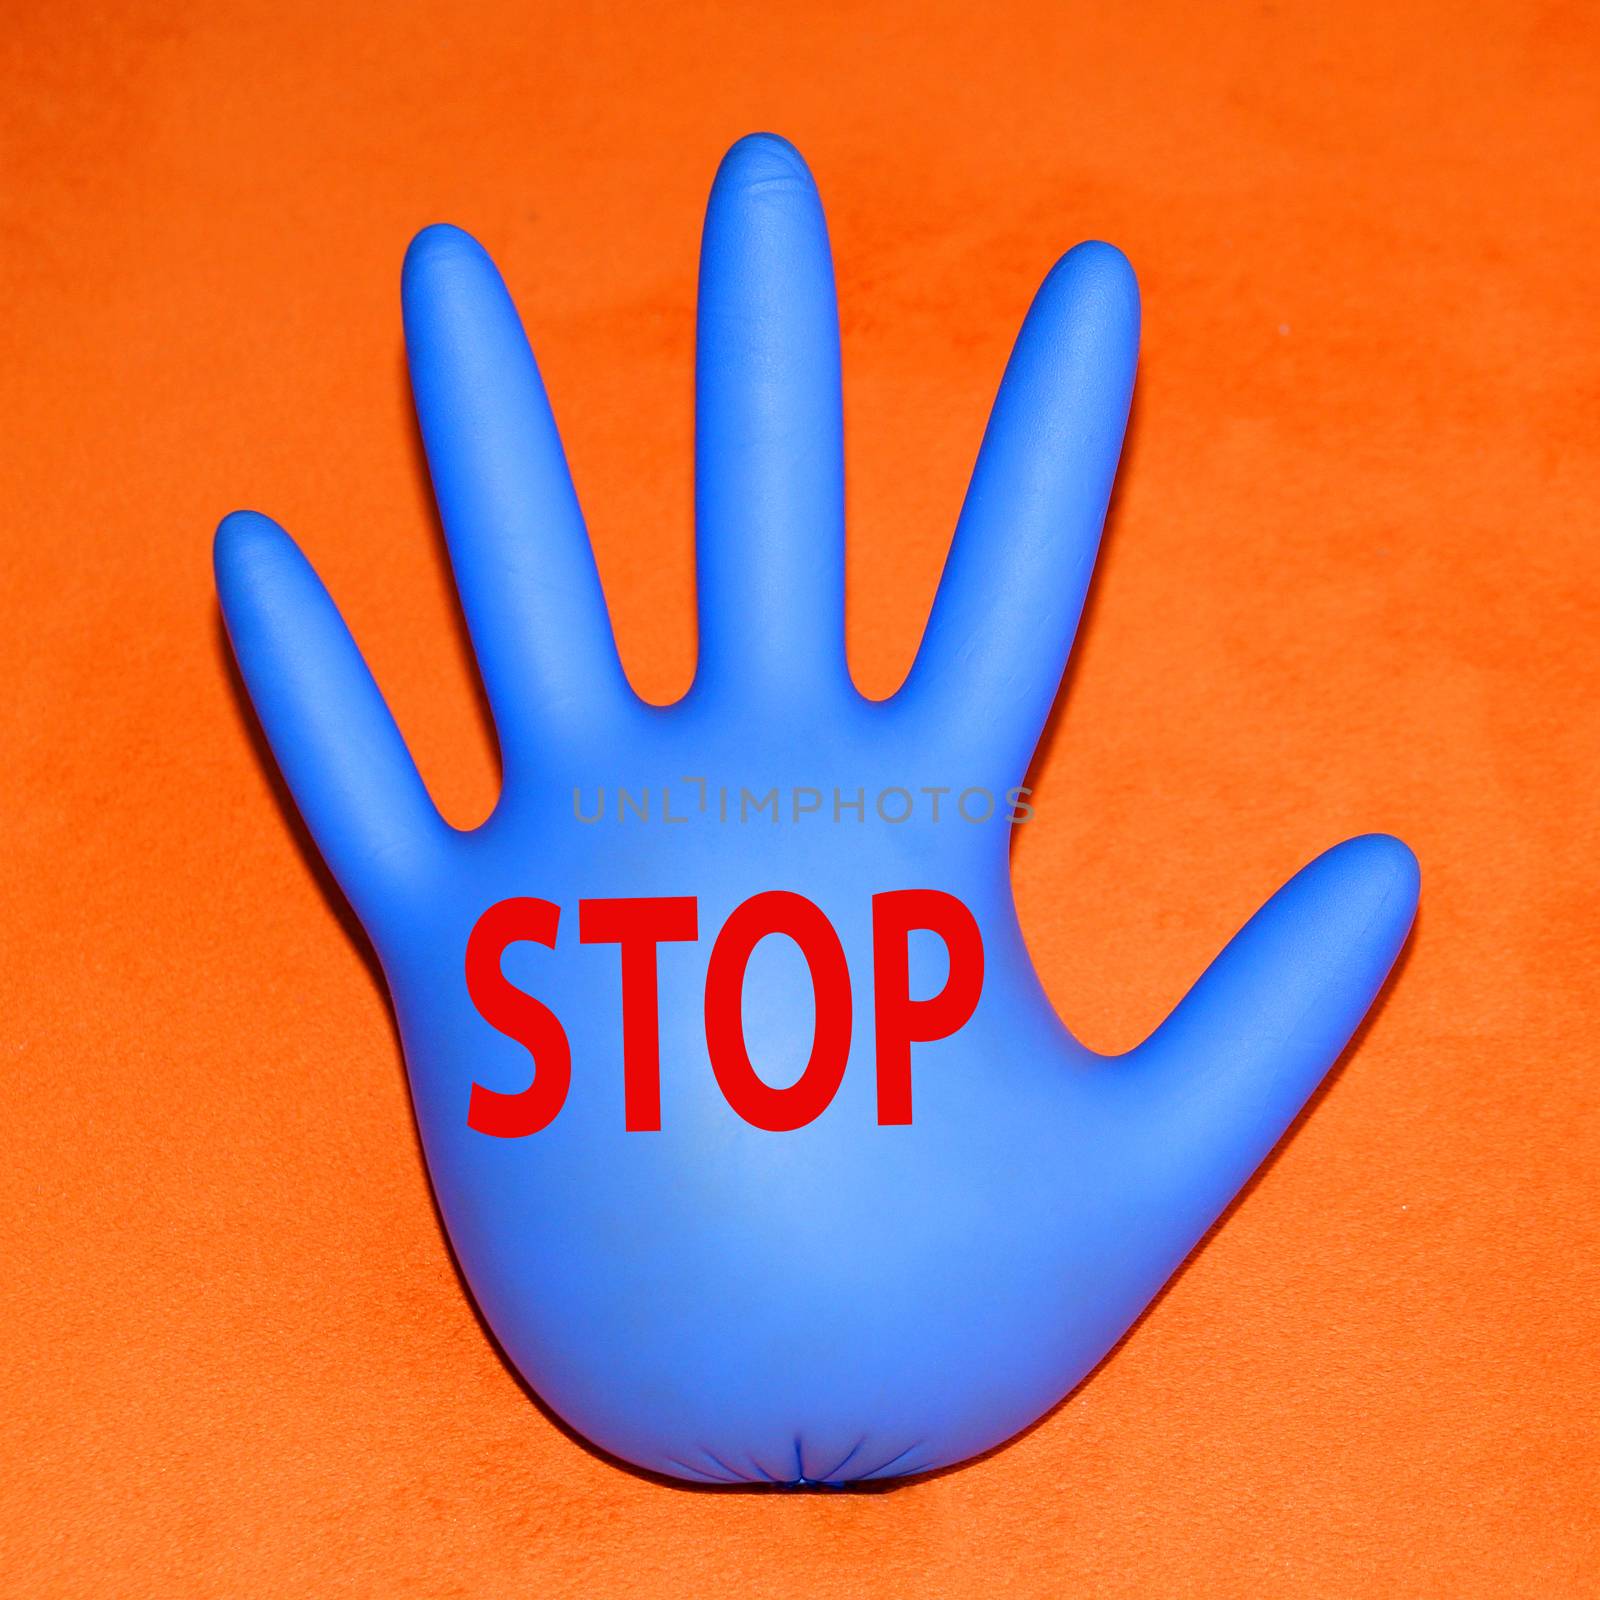 inflated rubber medical glove with stop sign on orange background, copy space, square photo